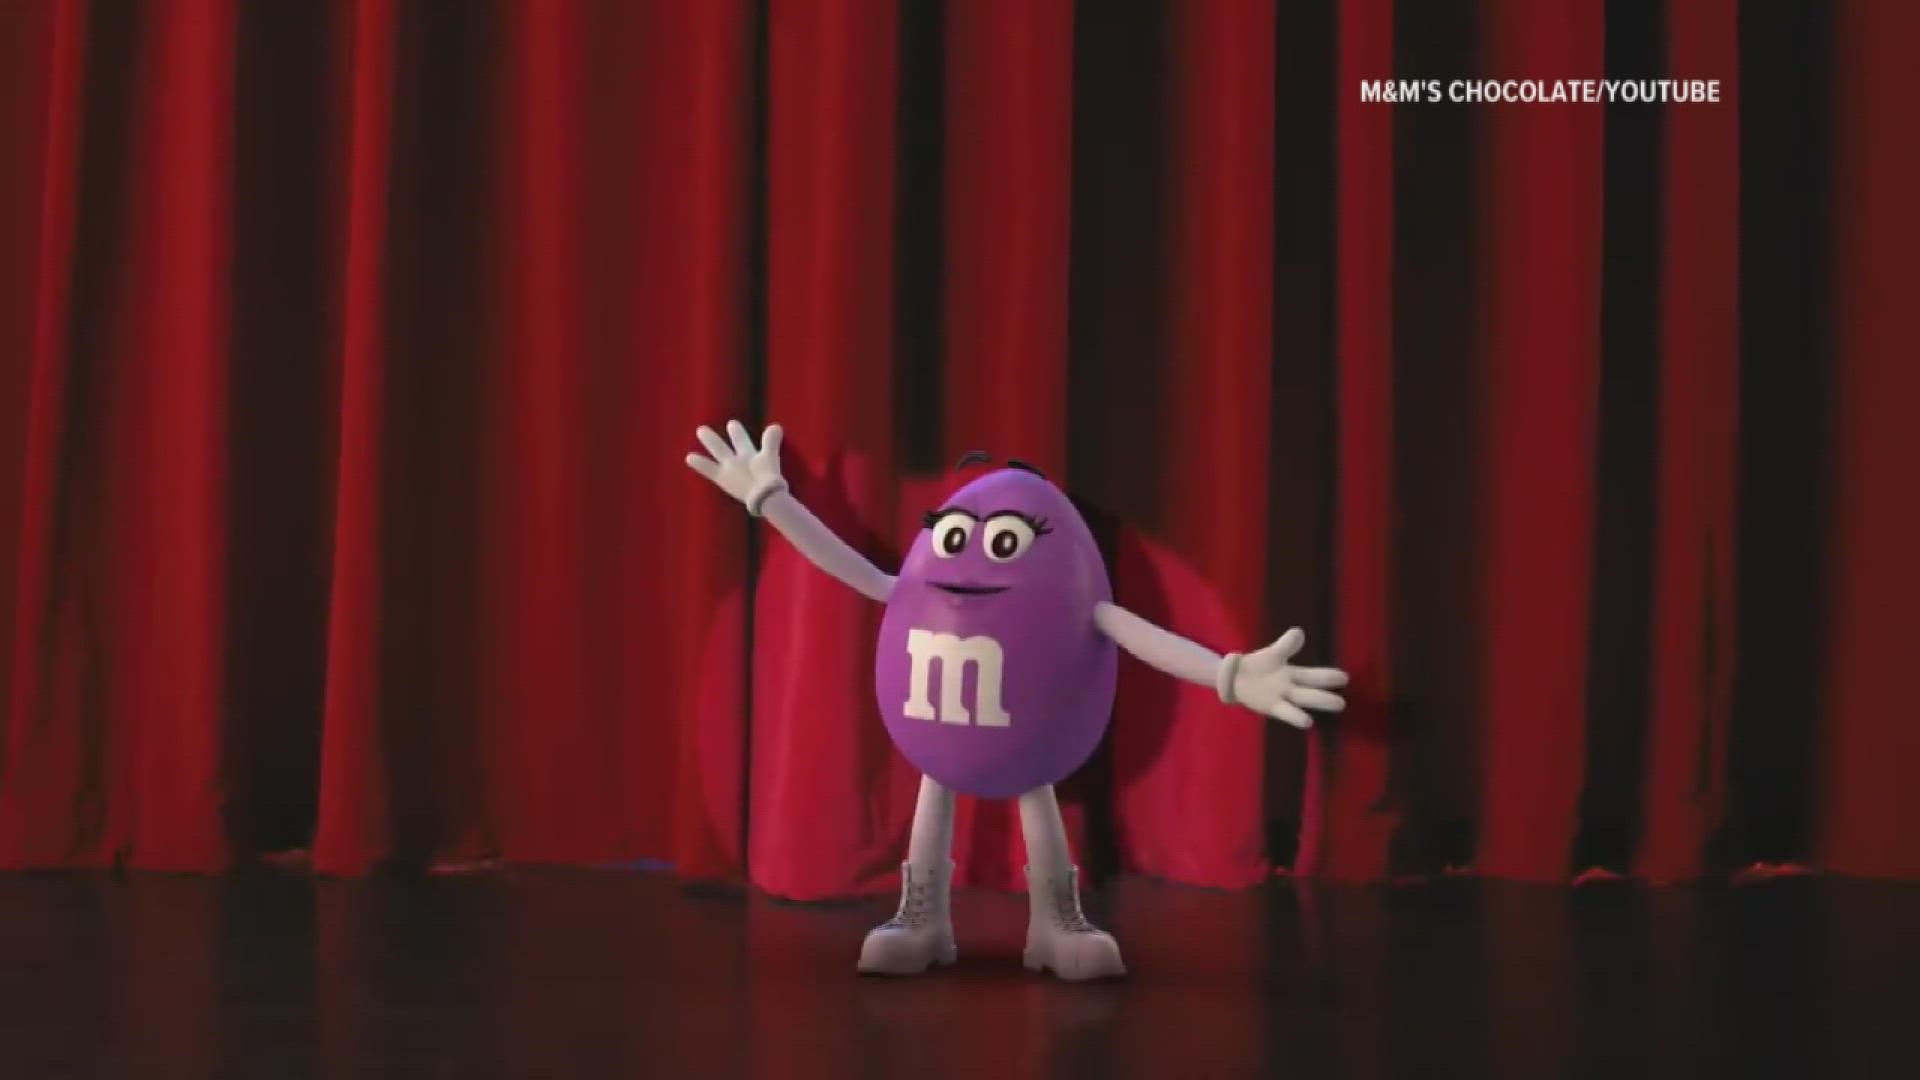 For the first time in ten years, Mars Candy is adding a new M&M's color to its advertisements.